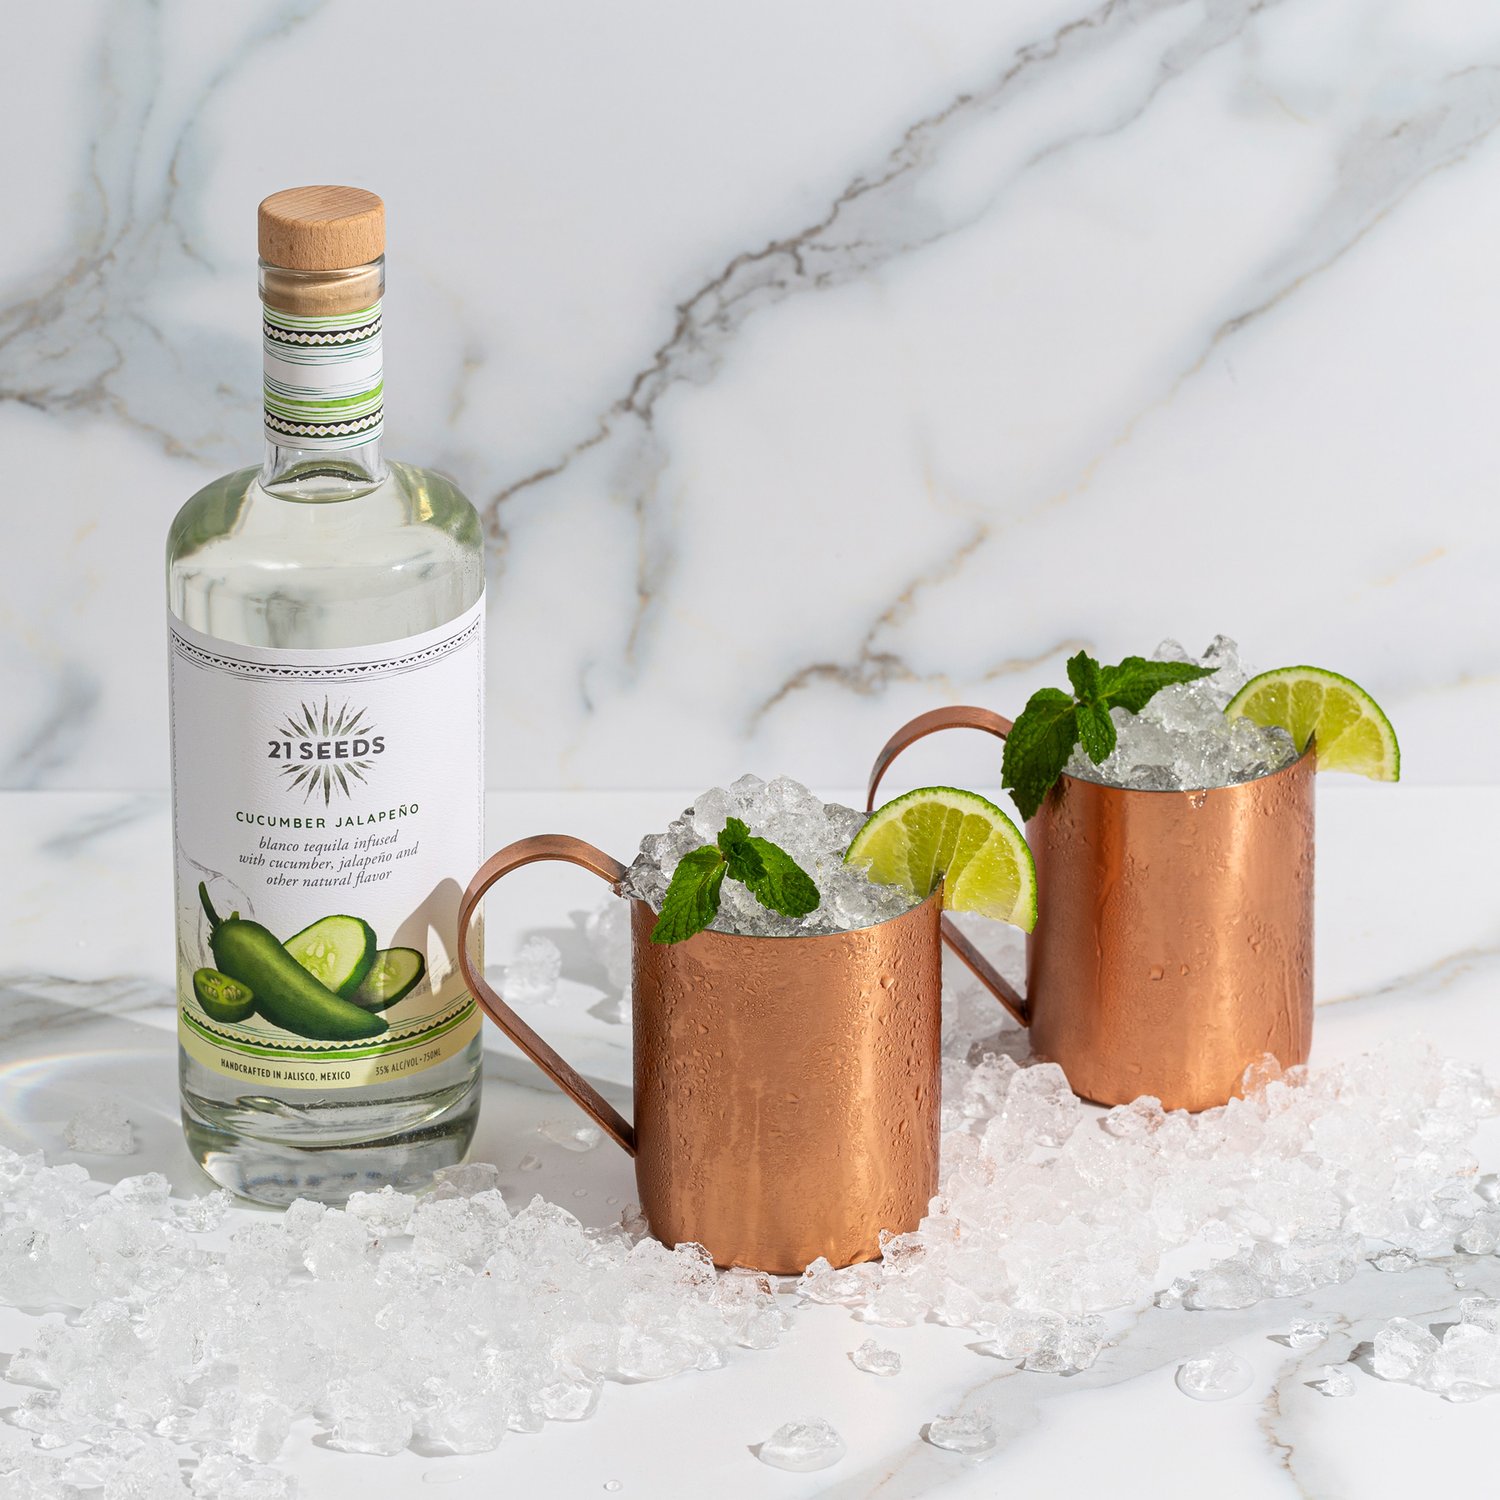 Two Jalisco mule cocktails in copper mugs garnished with a lime wheel and a mint sprig on a ice covered table. A bottle of 21Seeds Cucumber Jalapeño sits to the left of the cocktails.